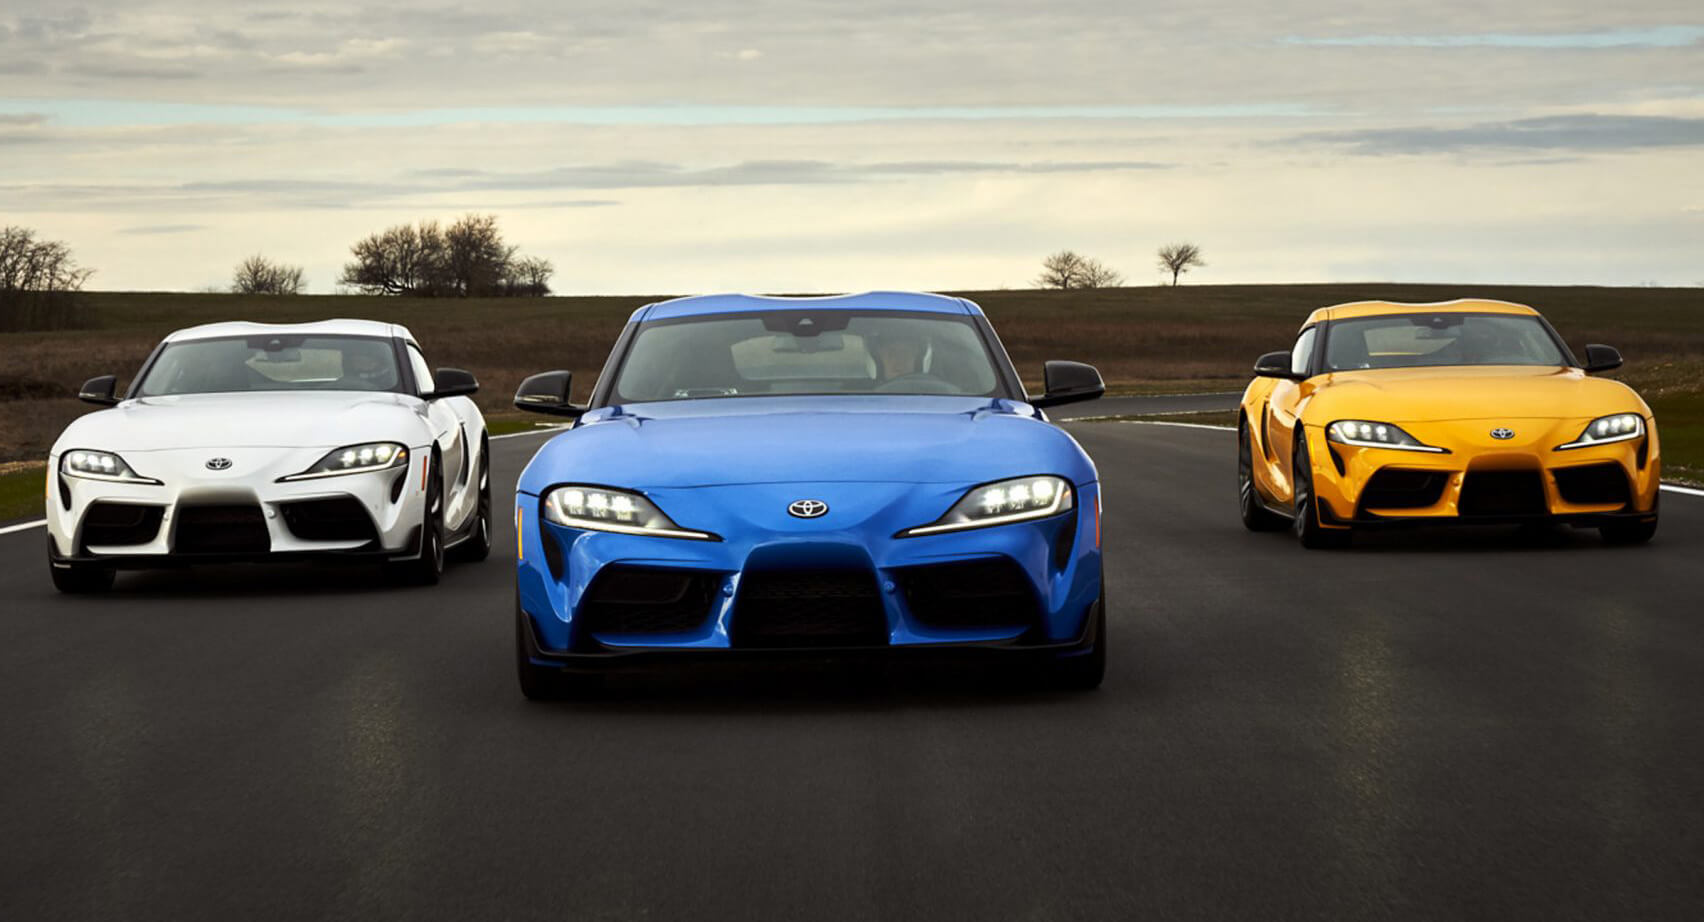 Toyota Dealer In Louisiana Wants To Convince Corvette Fans To Buy A Supra